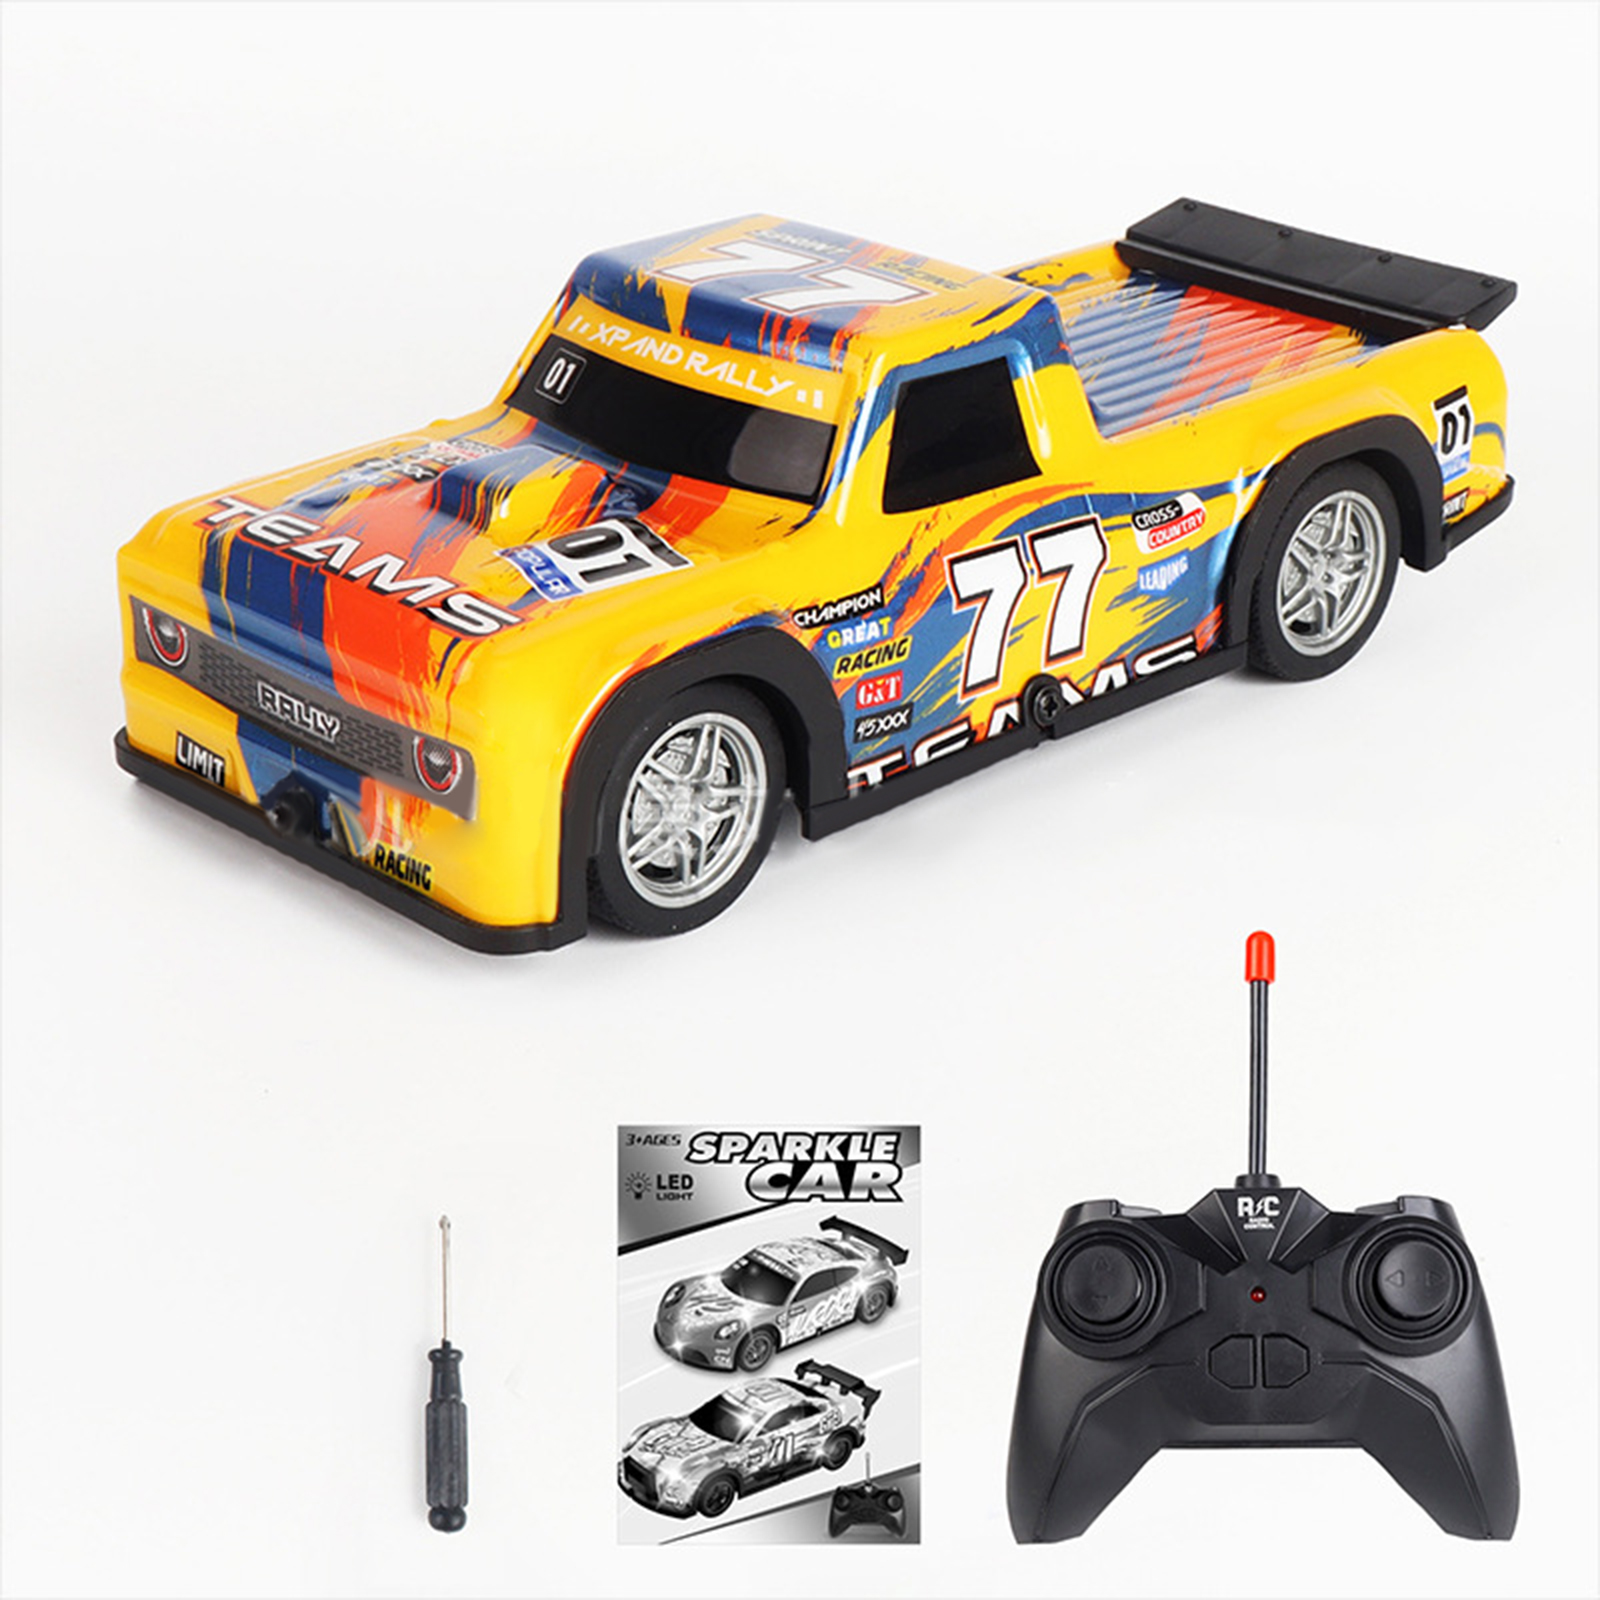 1:22 27HZ Remote Control Racing Car With LED Light 4-Channel Rc Drift Car Model Ornaments Birthday Gifts For Boys (Without Battery)